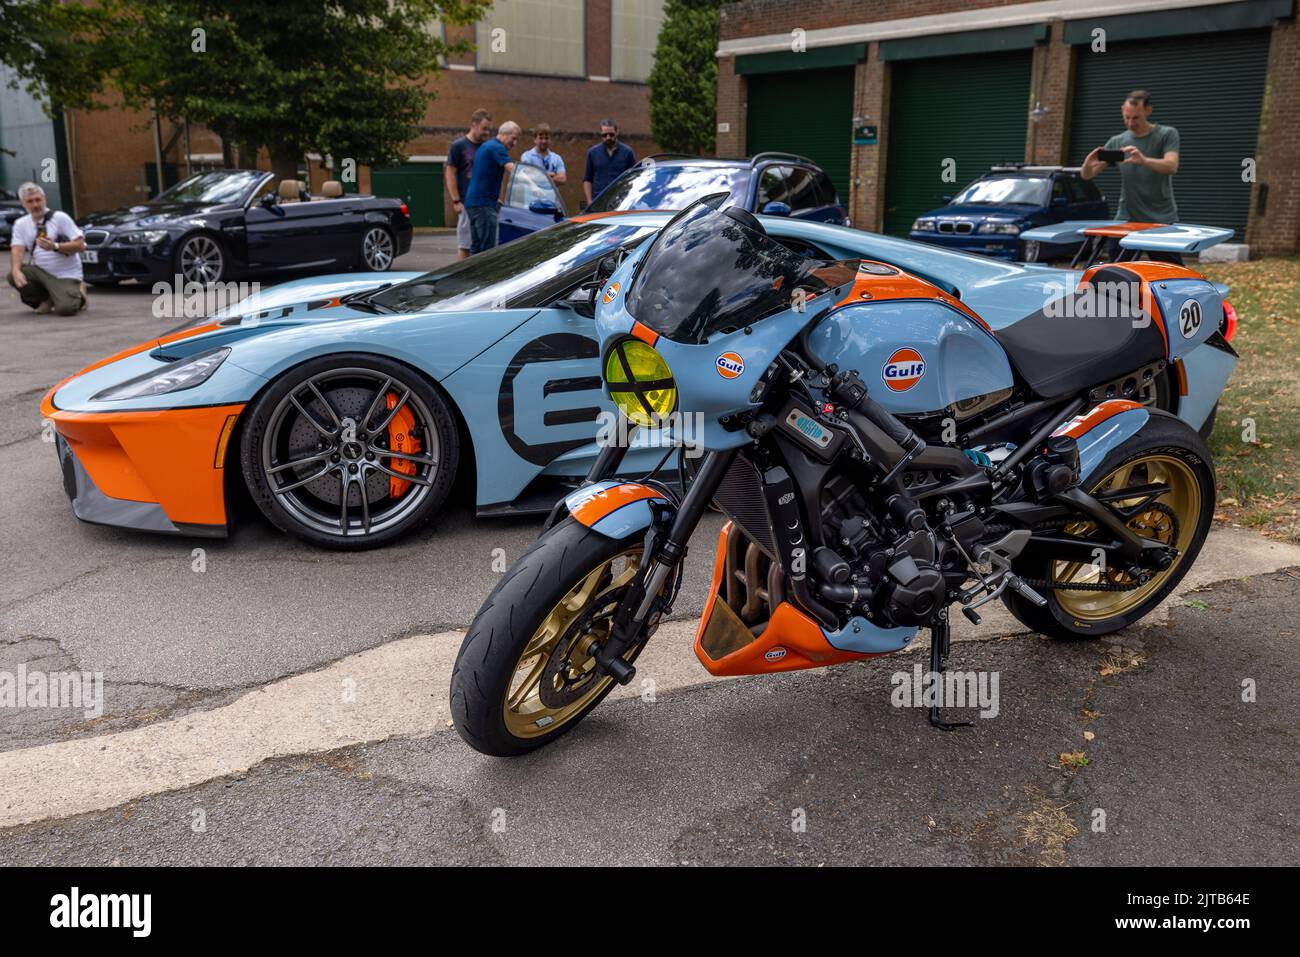 Ford GT MkIiI ‘NX21 HNR’ & Yamaha XSR900 Abarth ‘AU67 HBX’ both with the iconic Gulf livery at the Bicester Heritage Centre Stock Photo